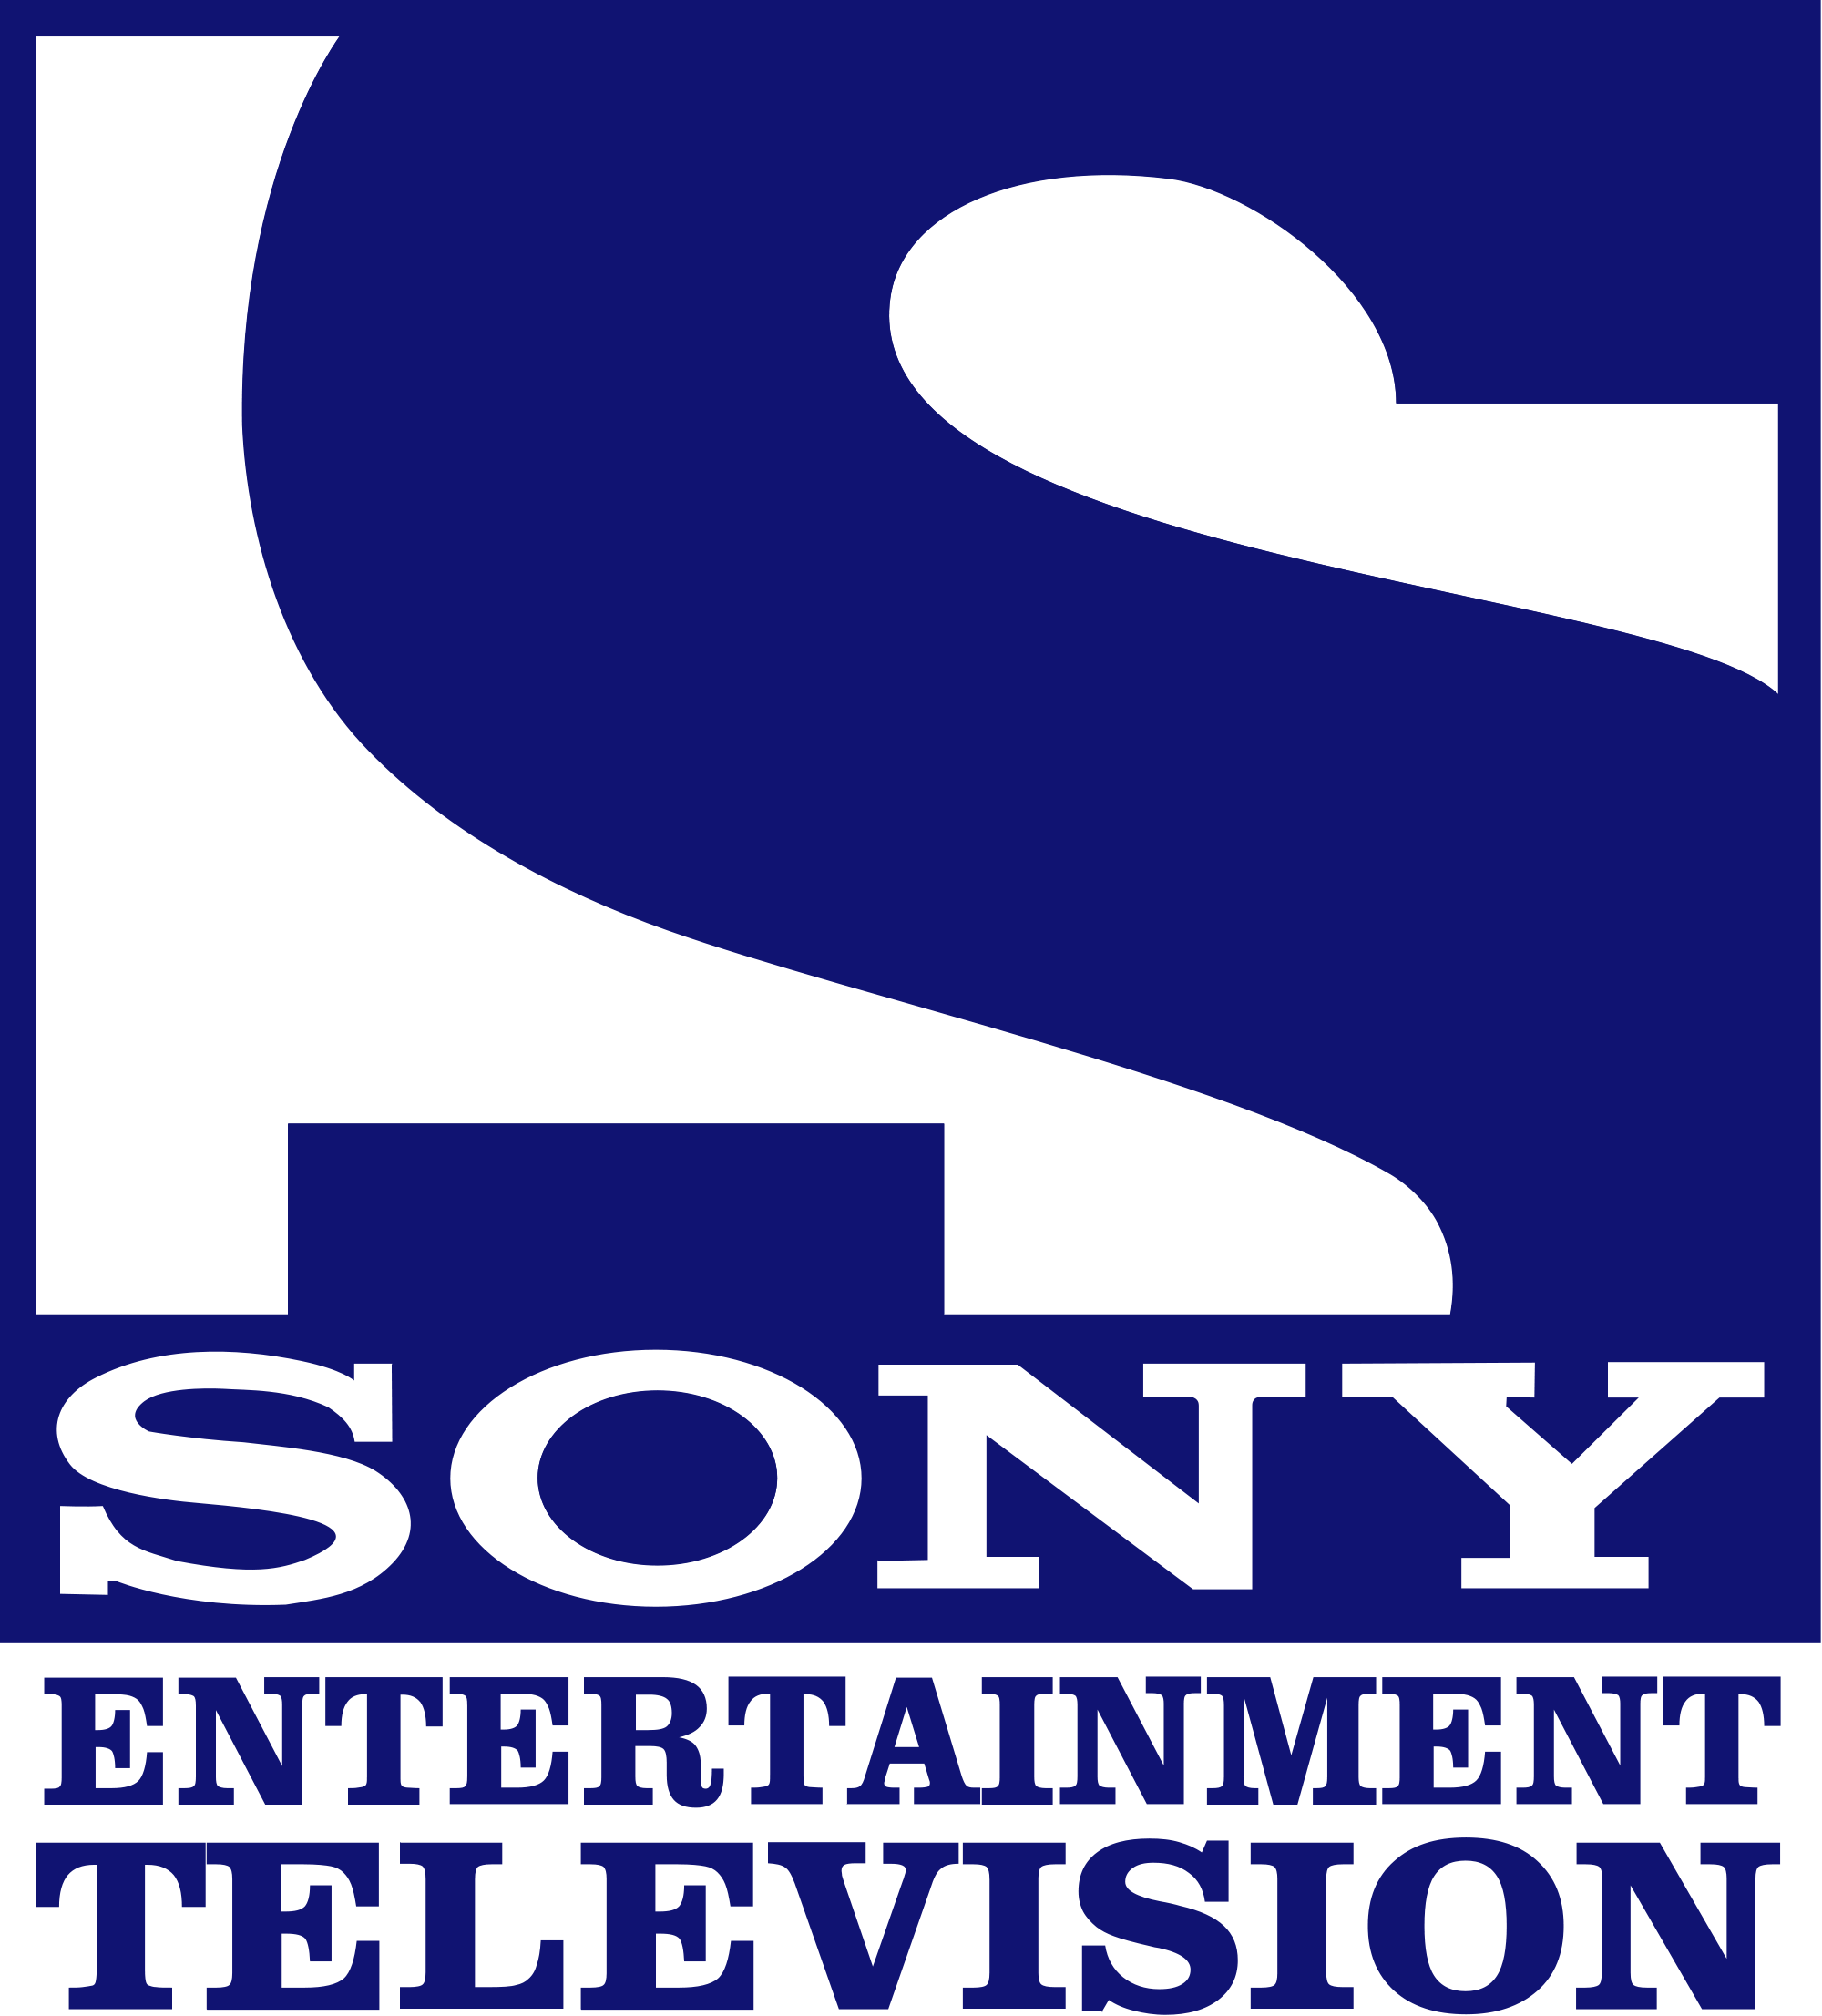 Sony TV Logo - File:Sony Entertainment Television logo.png - Wikimedia Commons